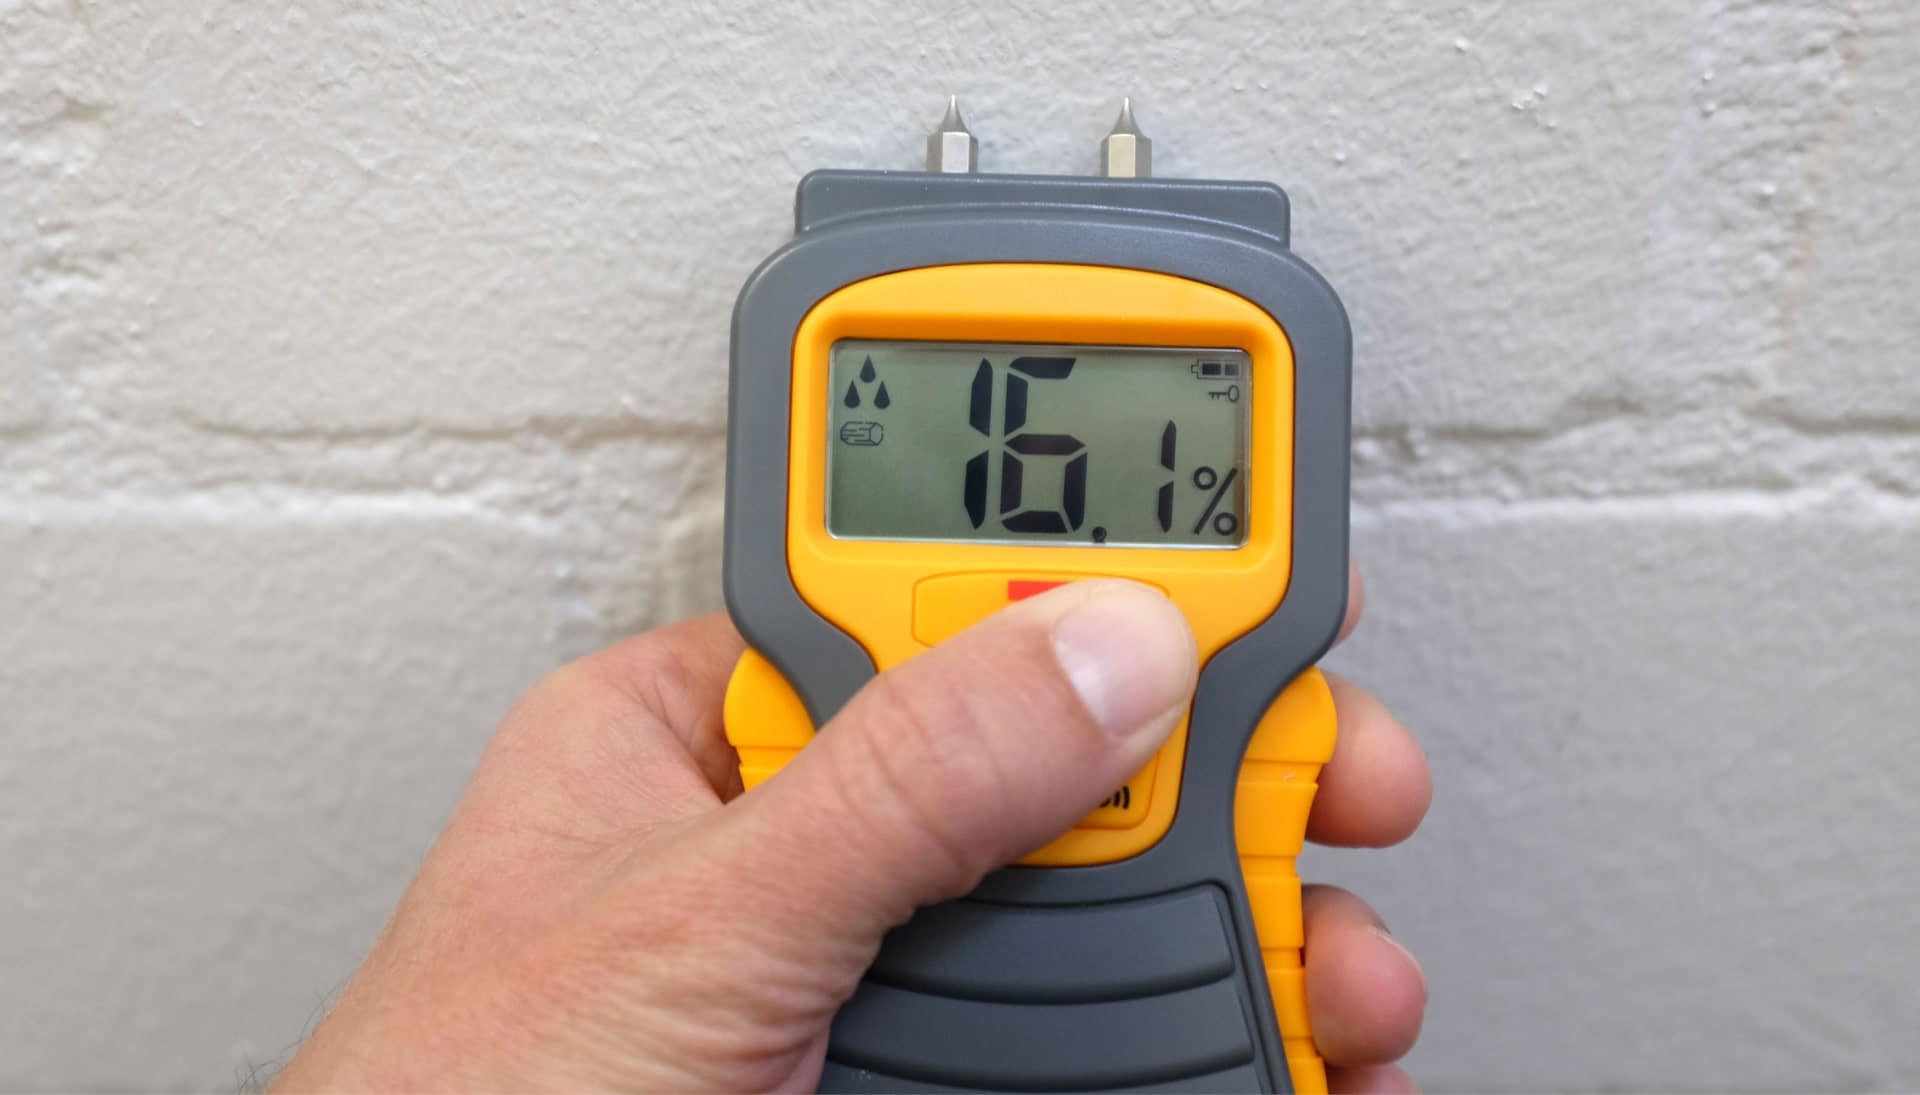 We provide fast, accurate, and affordable mold testing services in Milwaukee, Wisconsin.